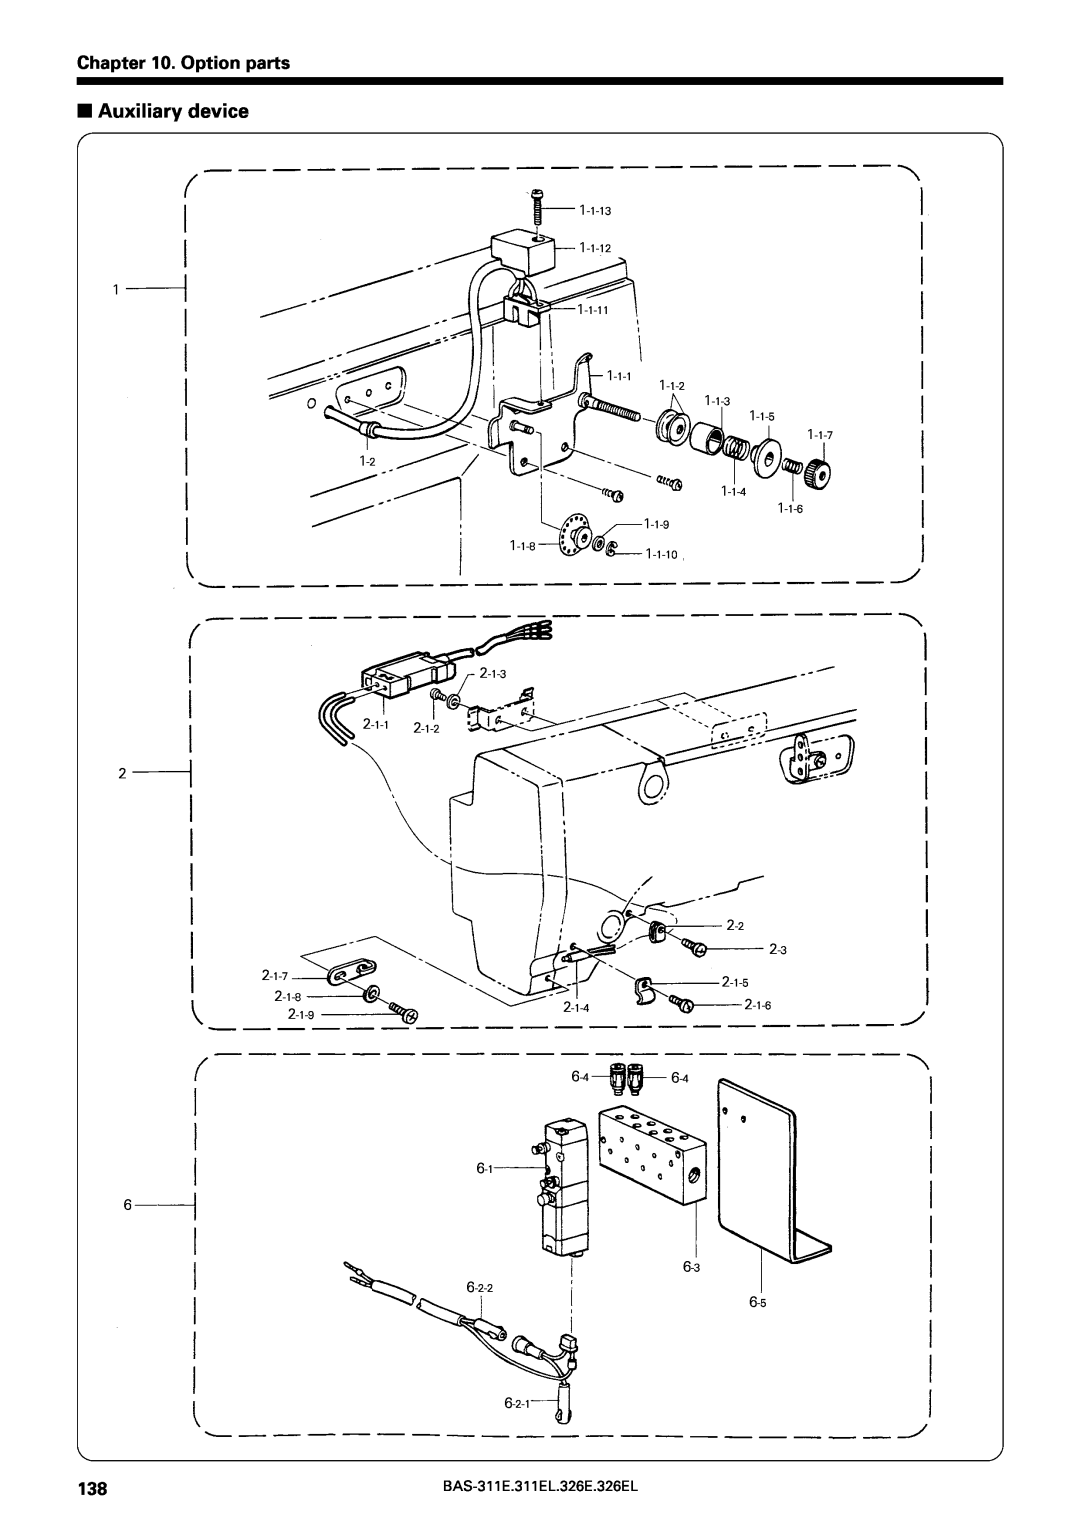 Brother BAS-311E service manual Auxiliary device, Option parts 